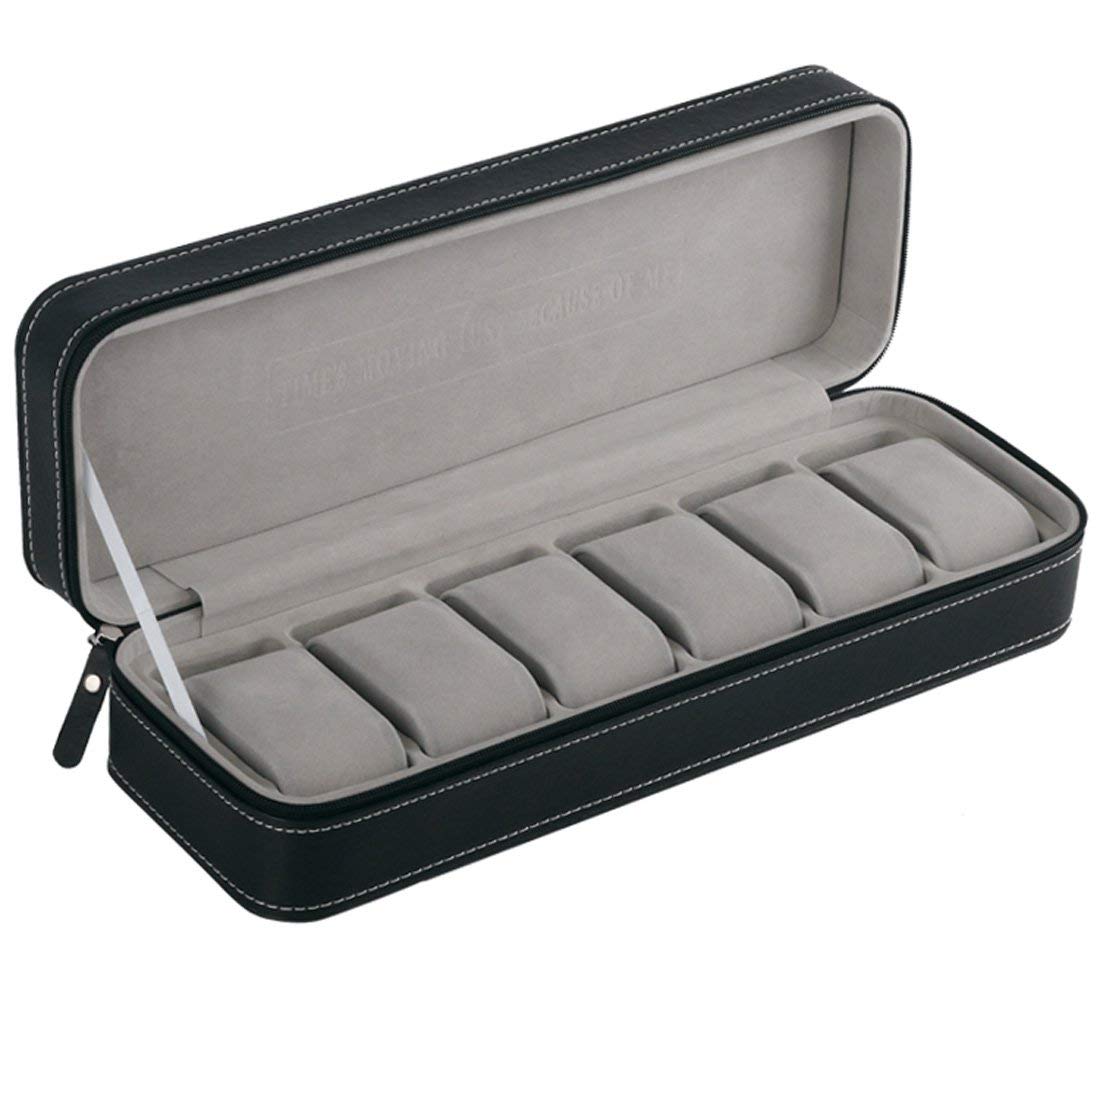 6 Compartment Watch Case - Portable zipped travel case